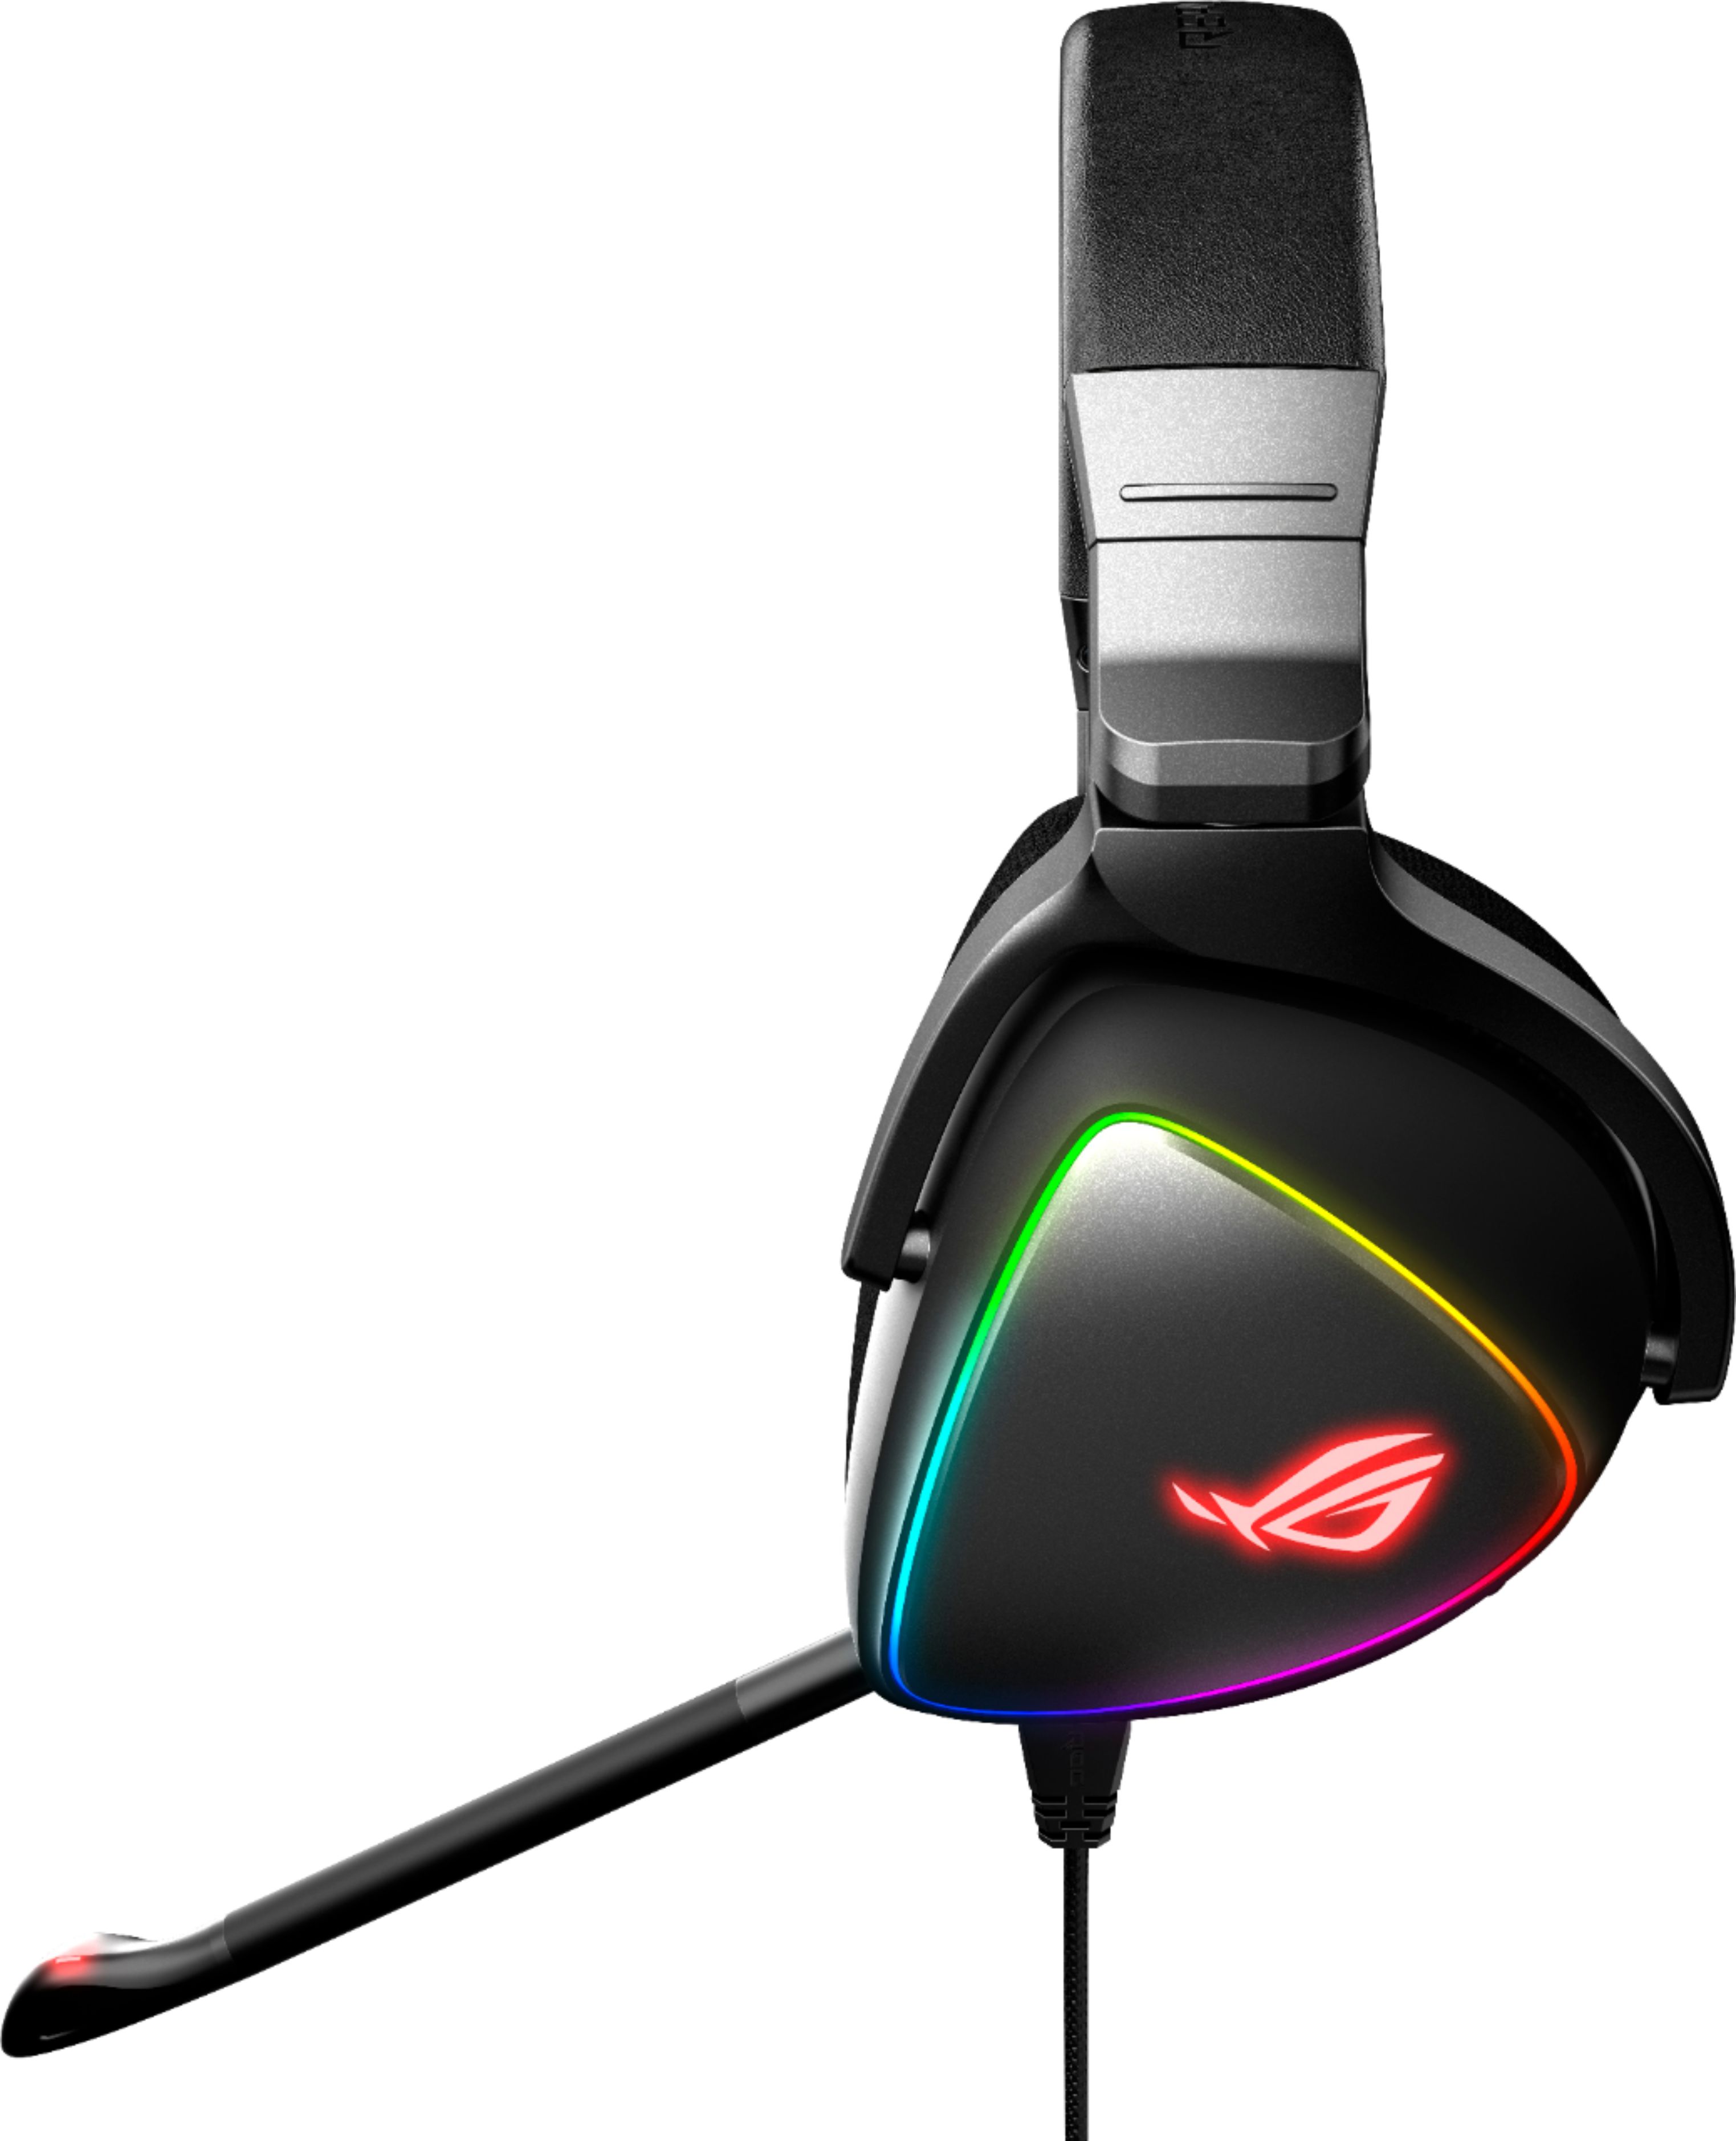 Angle View: ASUS - ROG Delta RGB Wired Stereo Gaming Headset for PC, Mac, PS4, Nintendo Switch and Mobile Devices - Black